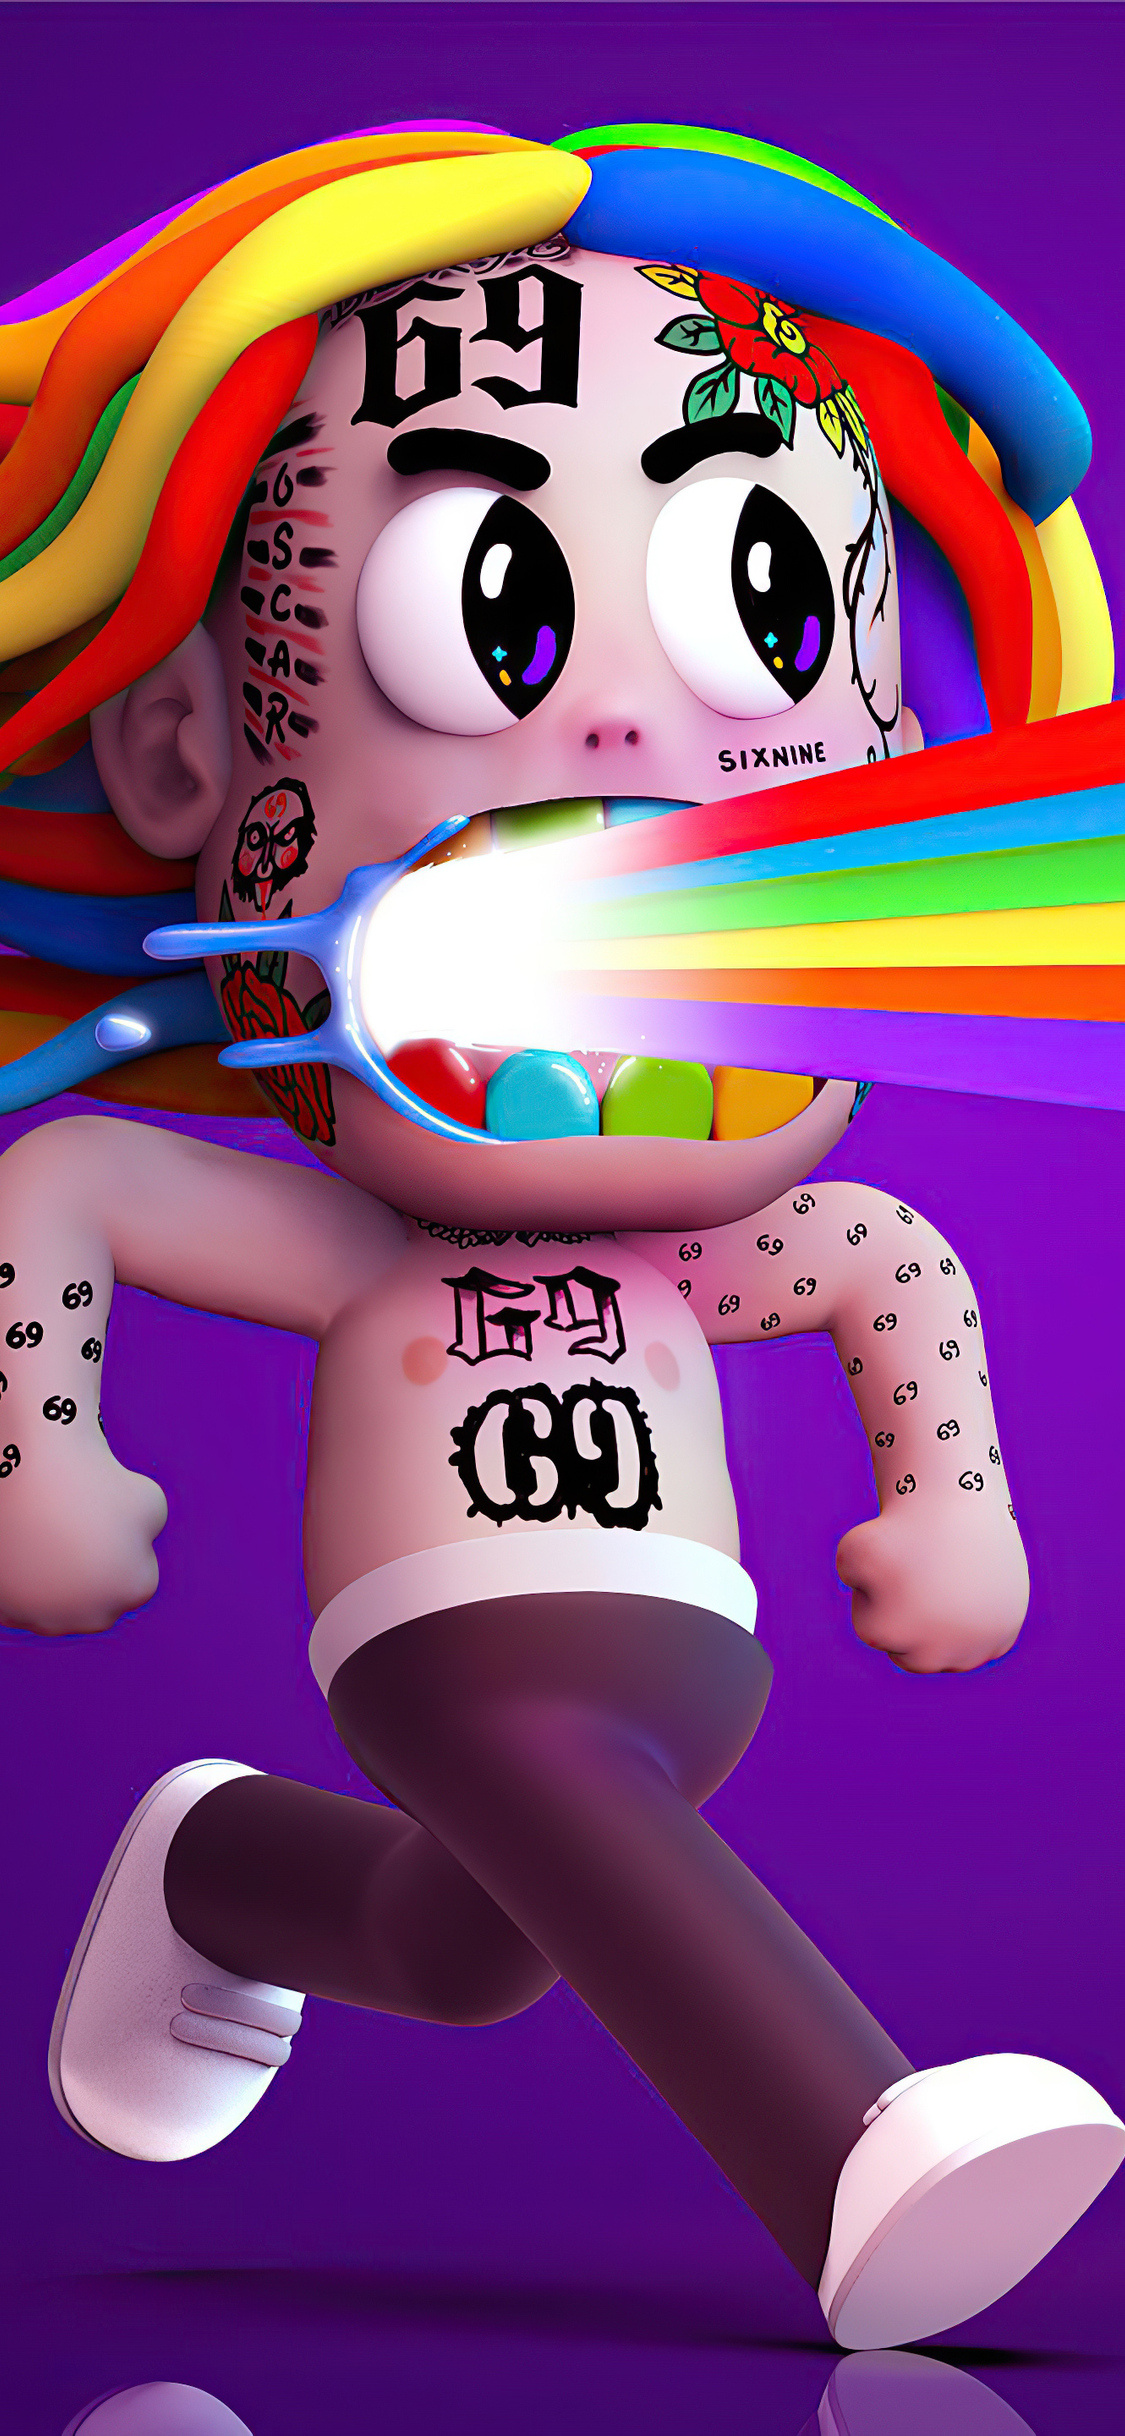 6ix9ine Wallpapers posted by Michelle Peltier 1130x2440